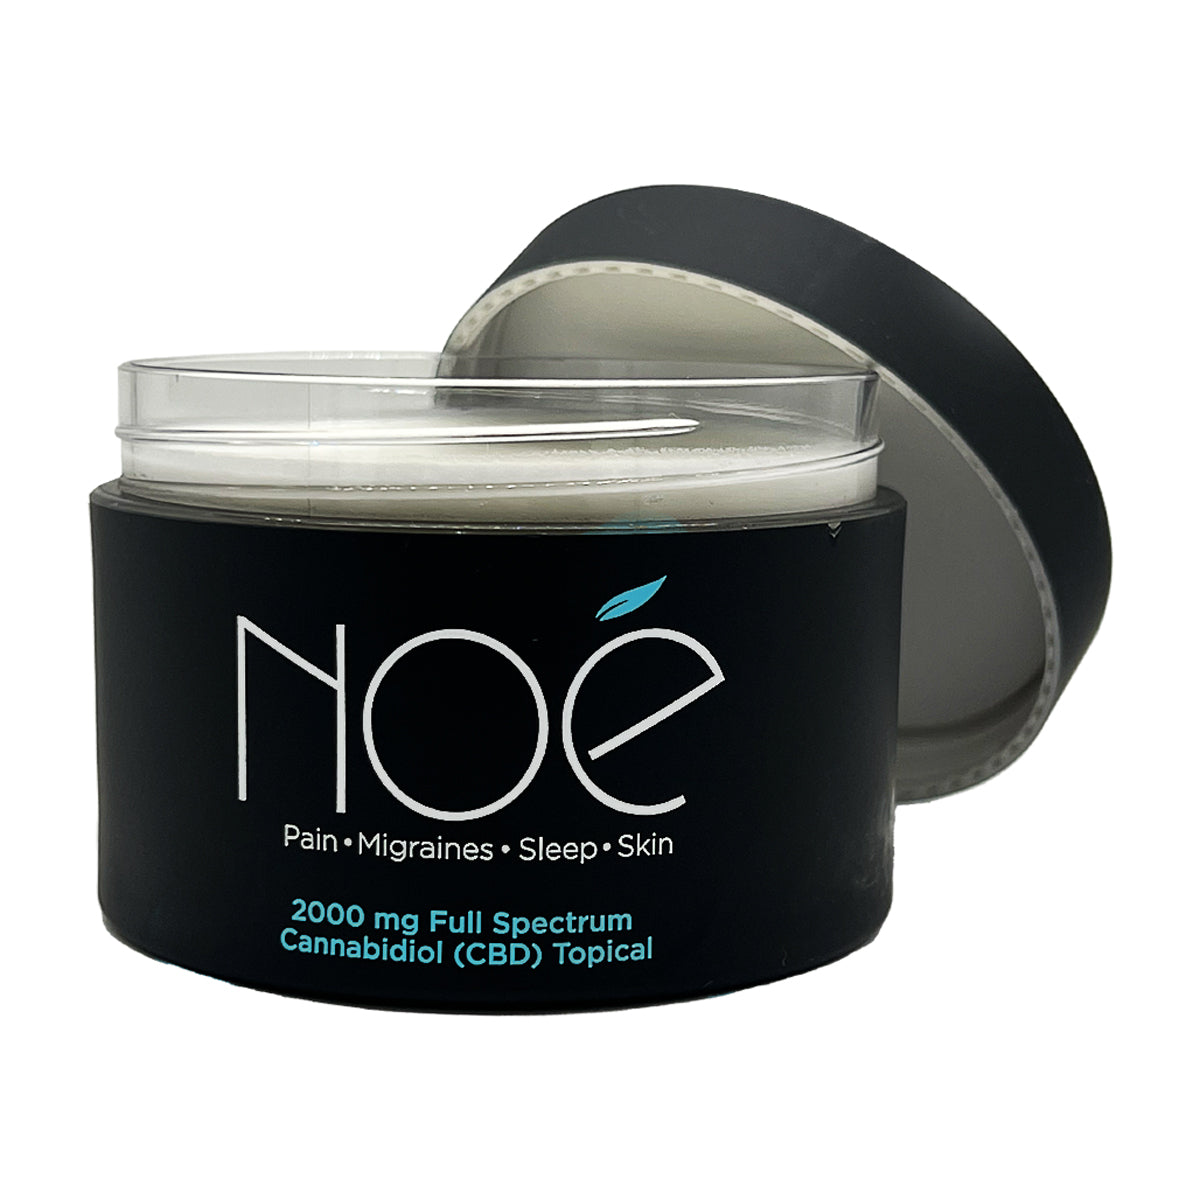 2000 mg CBD Topical to relieve aches and pains - Noé